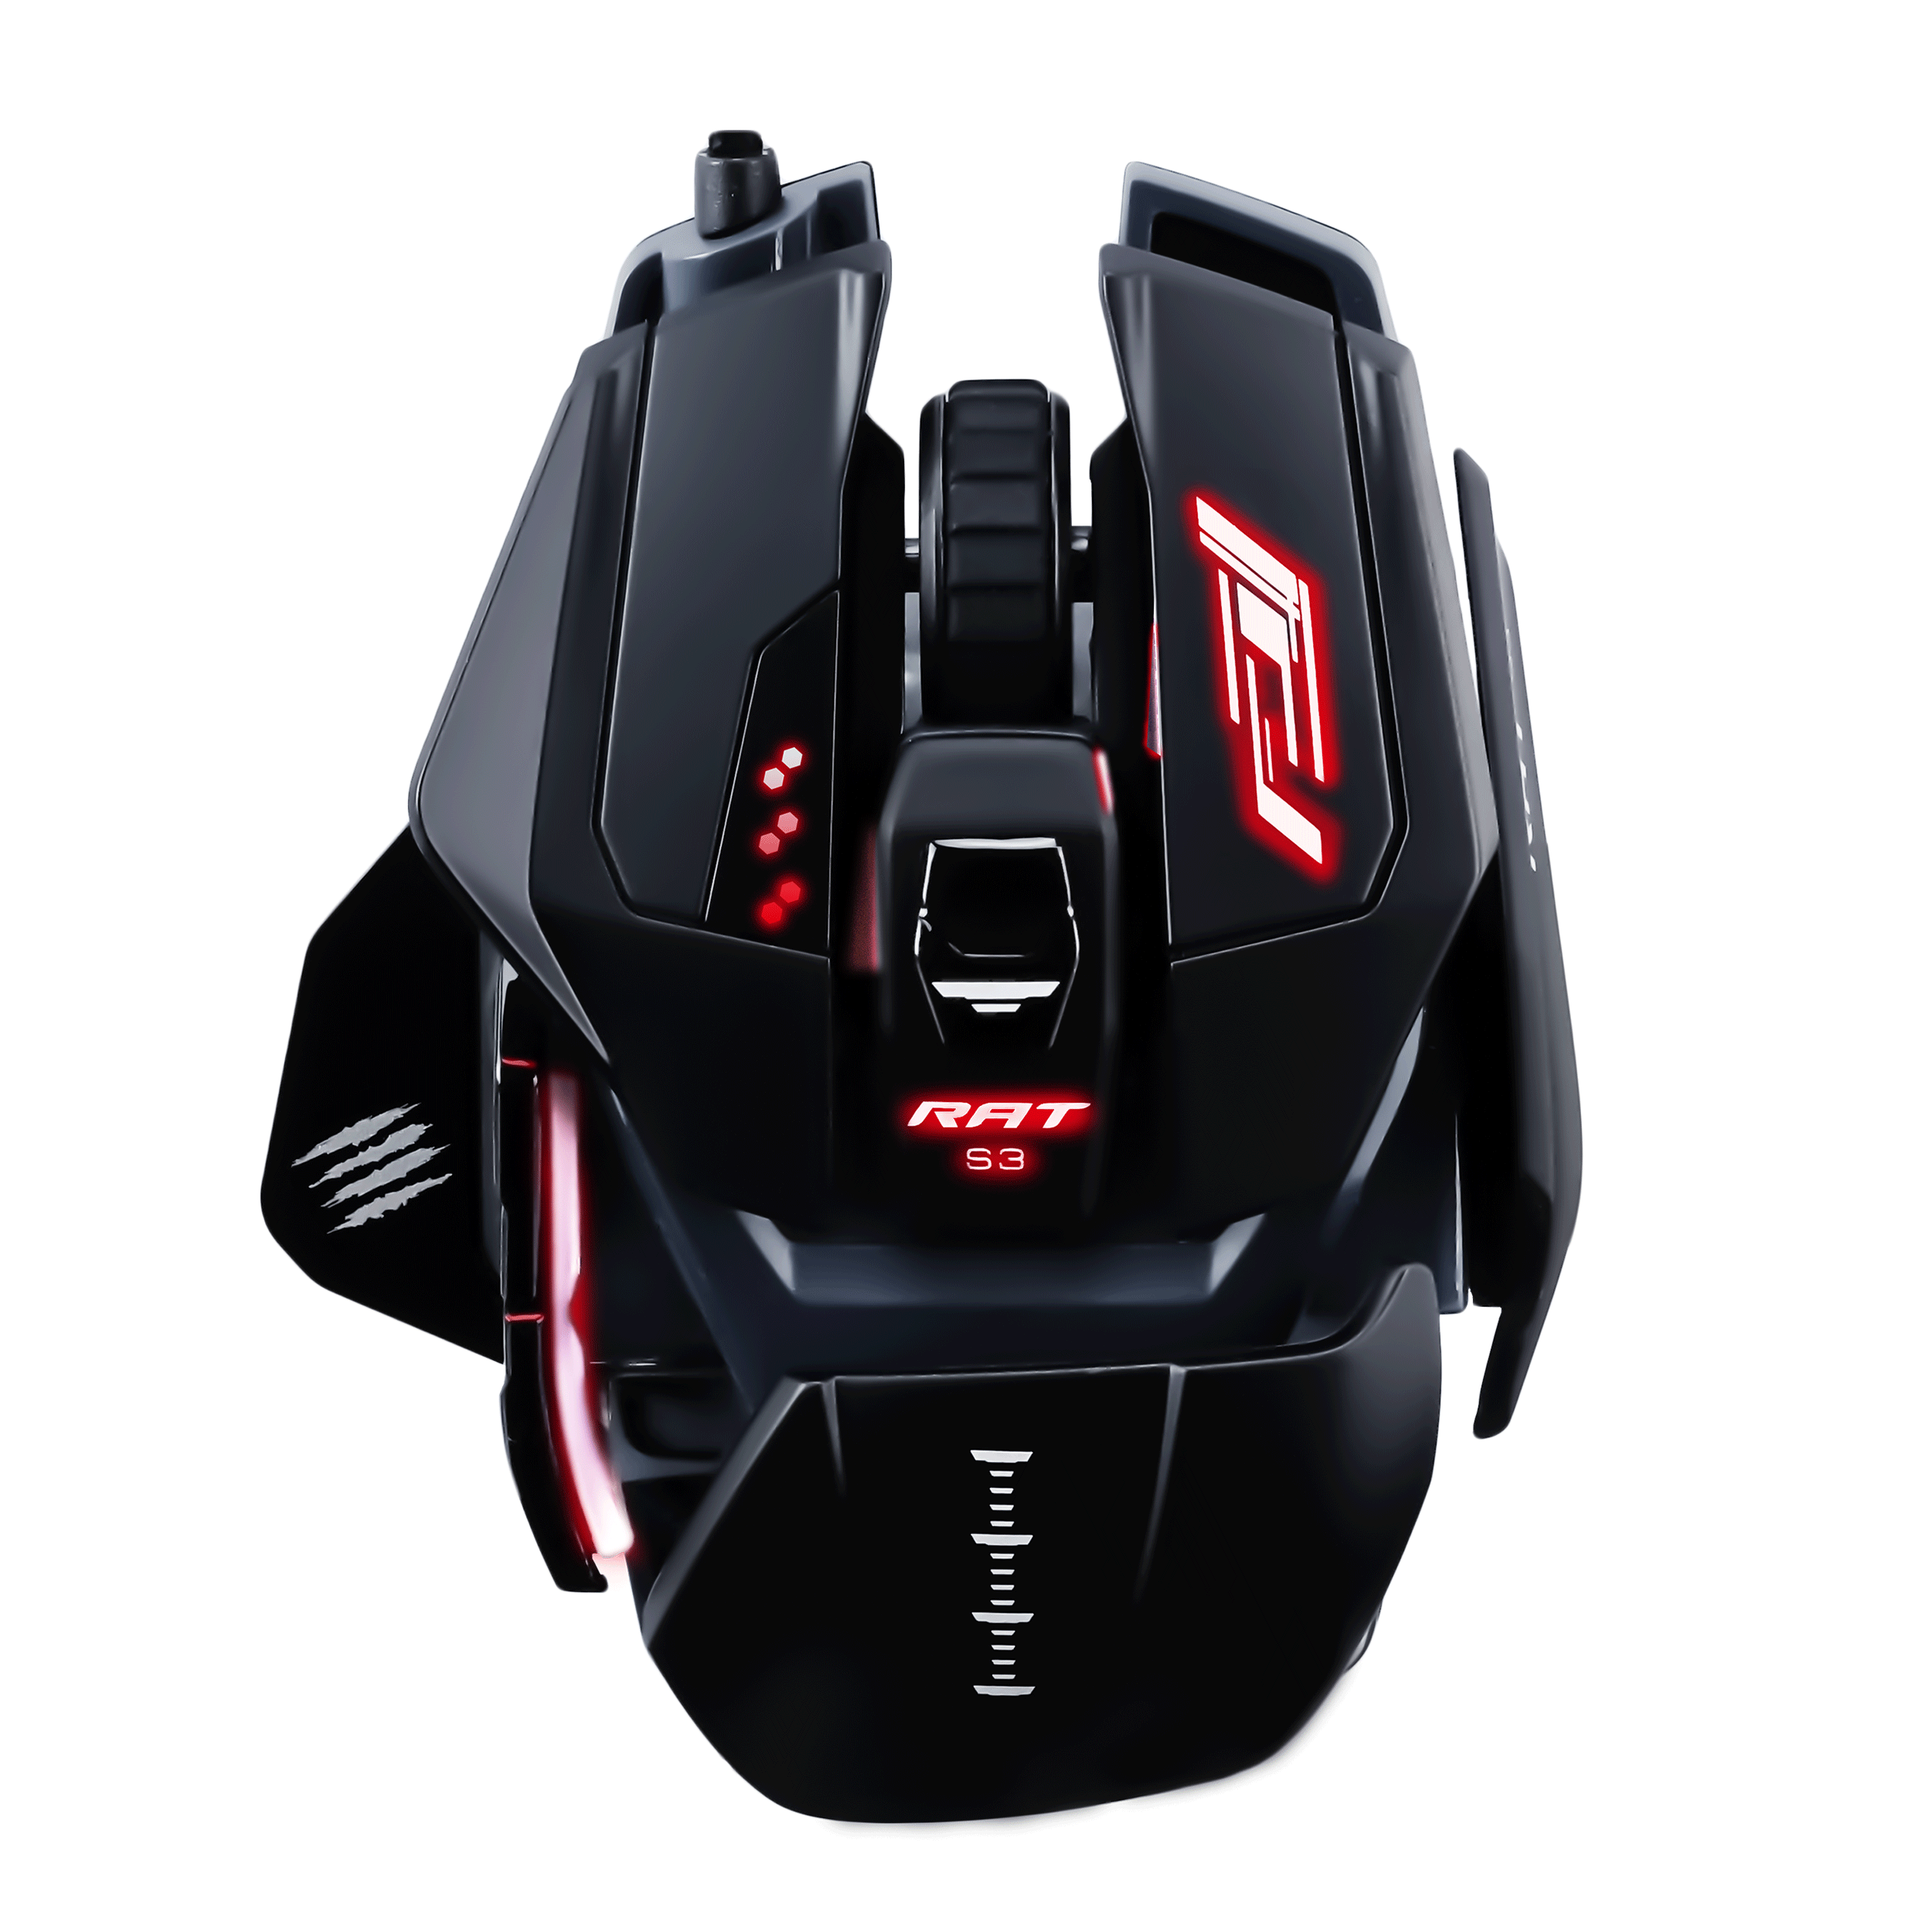 MAD CATZ R.A.T. Schwarz Mouse, Pro S3 Gaming